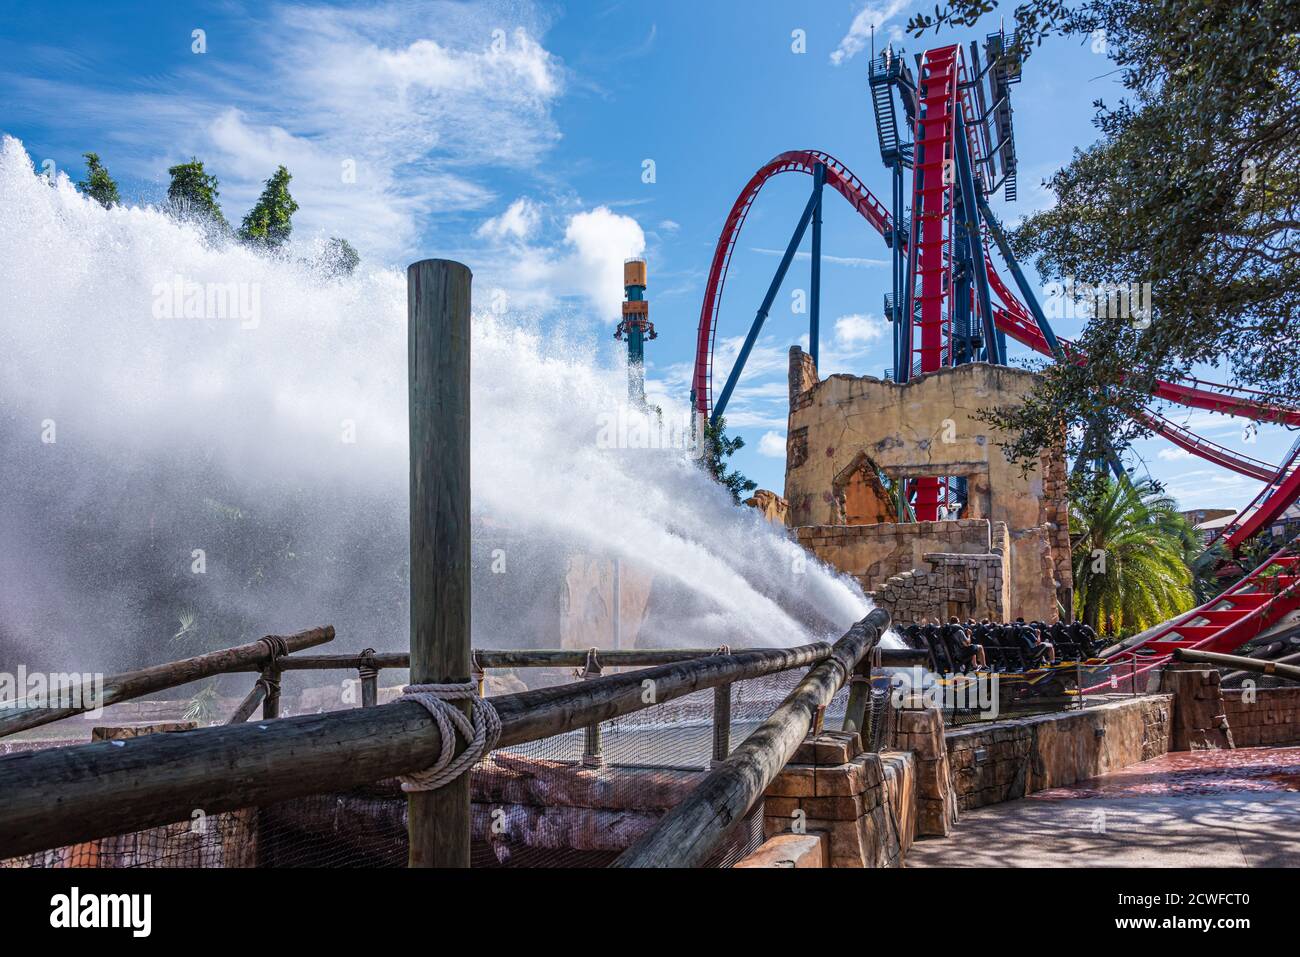 SheiKra, an extreme roller coaster at Busch Gardens in Tampa, FL, offers thrill seekers a 200 foot climb, 90 degree drop, and a splashdown finish. Stock Photo